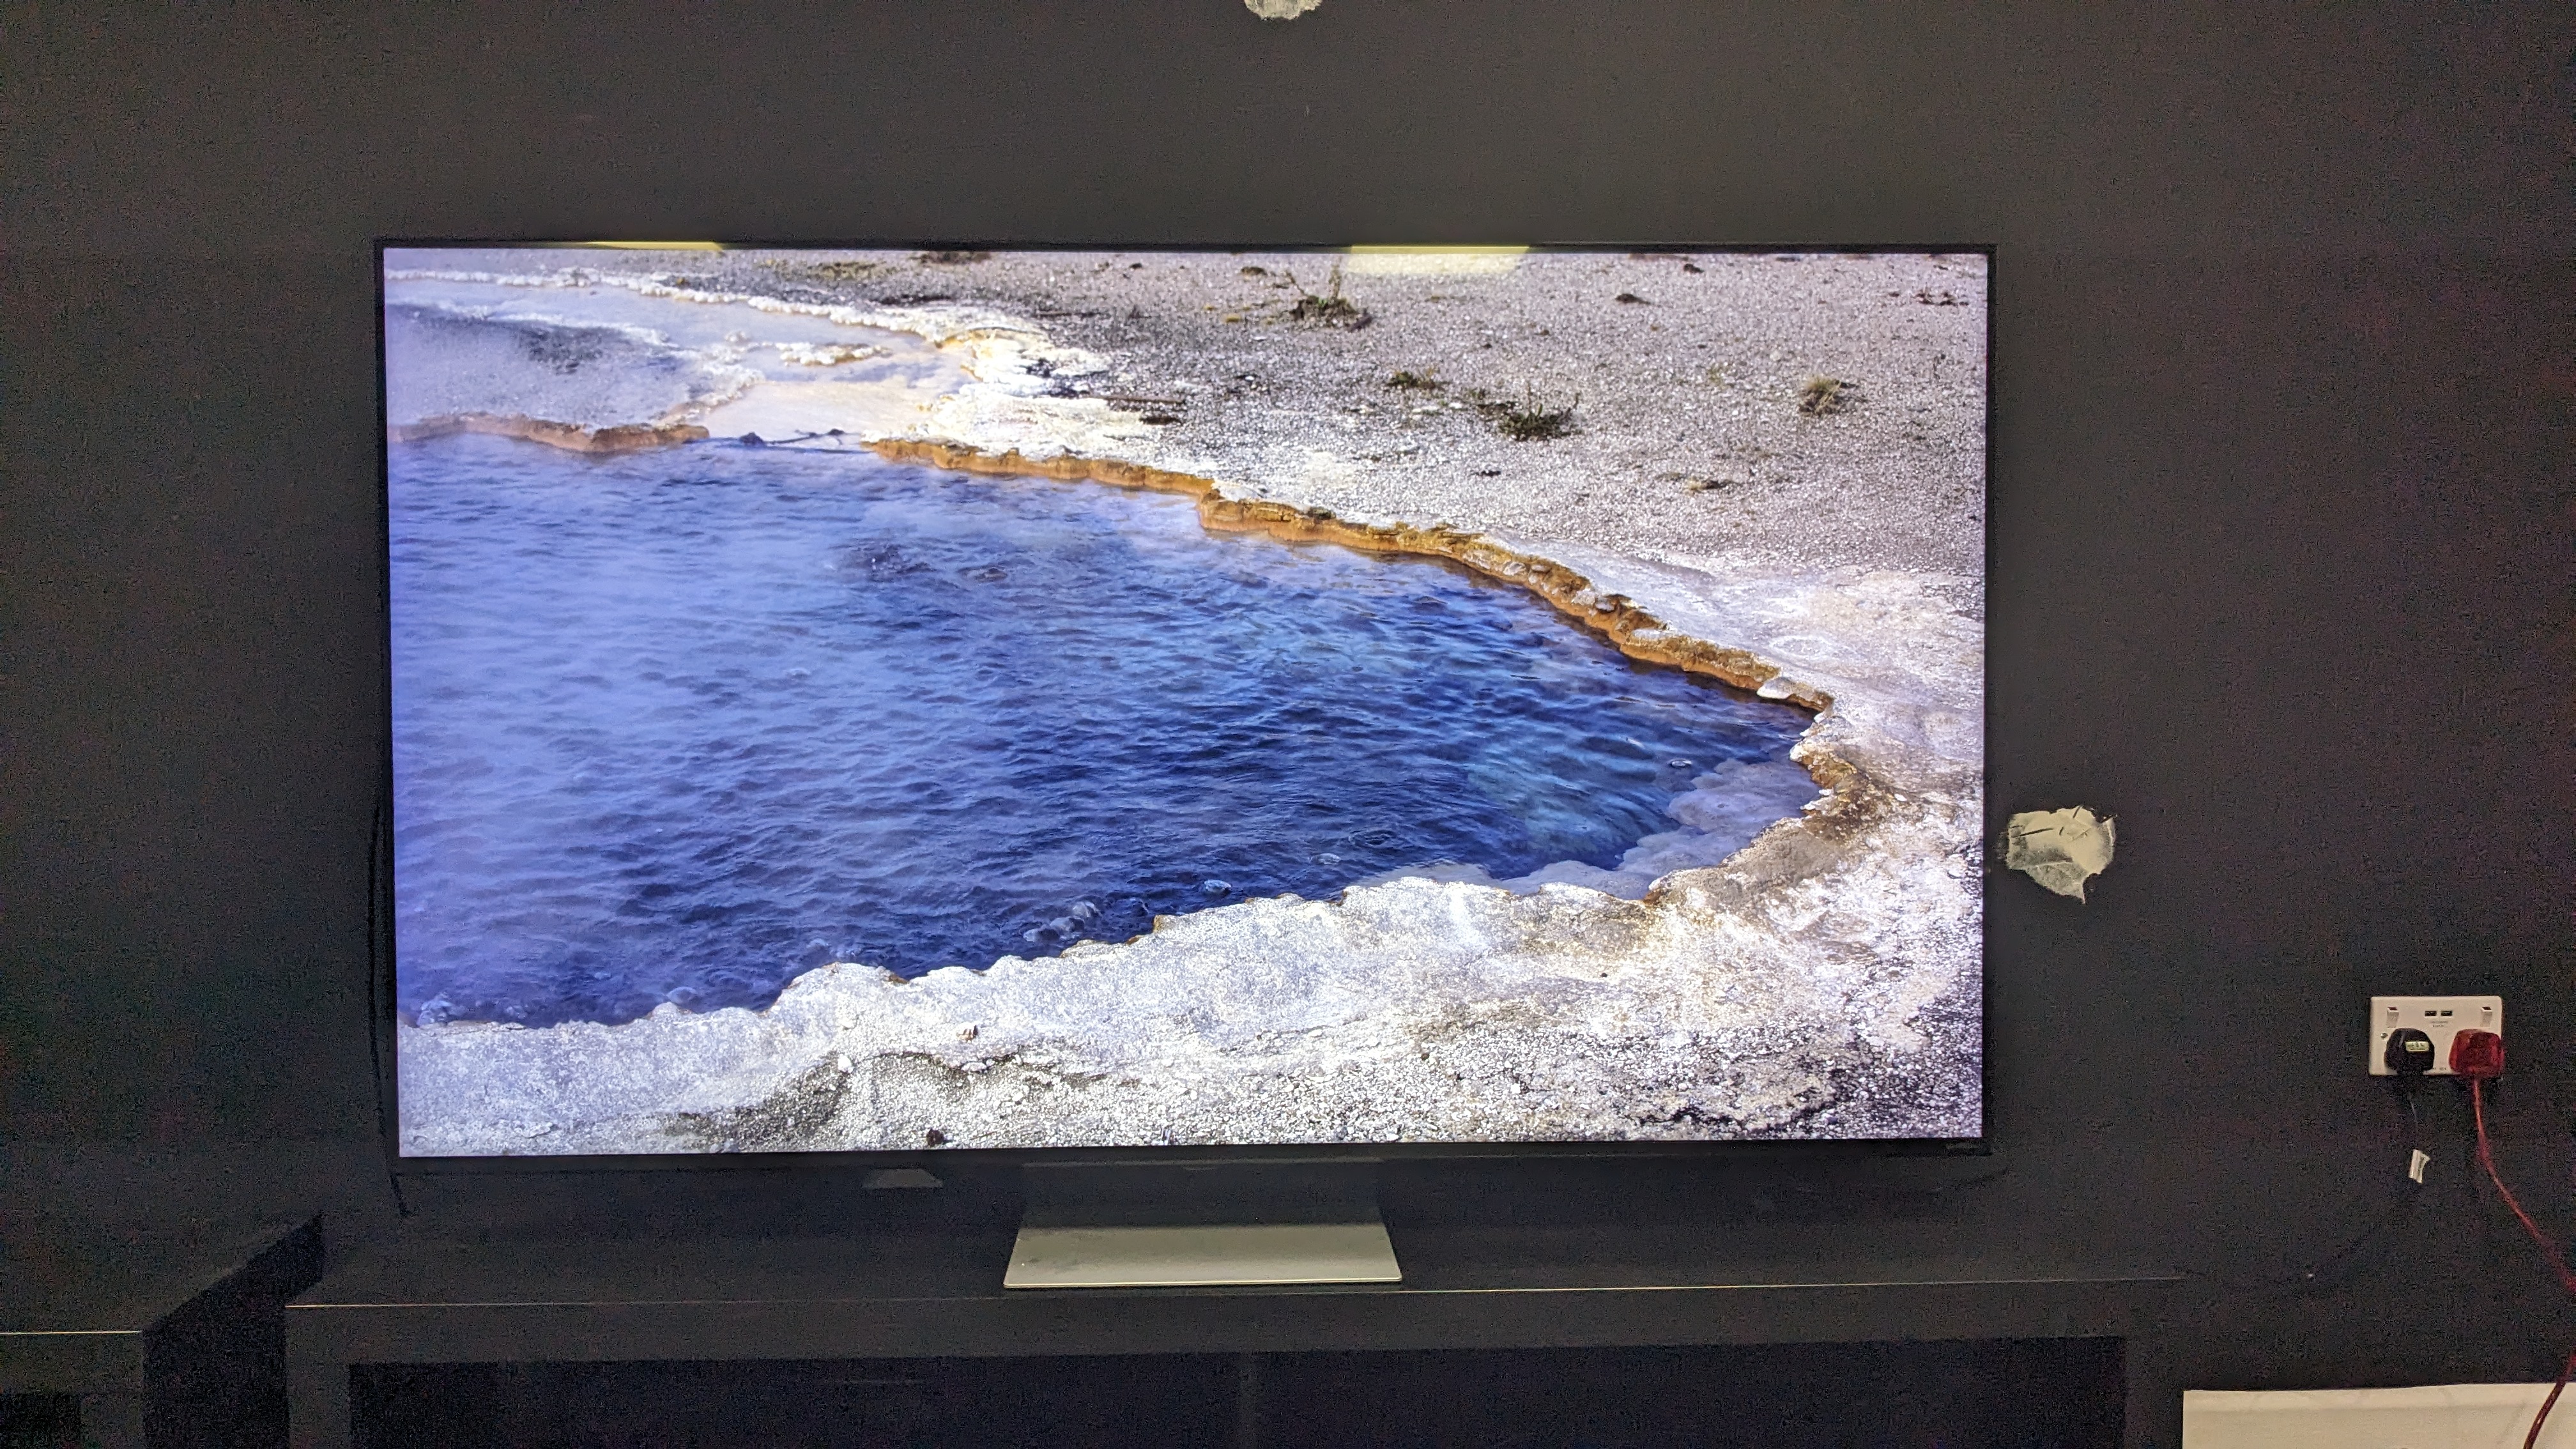 LG QNED91T with hot spring on screen